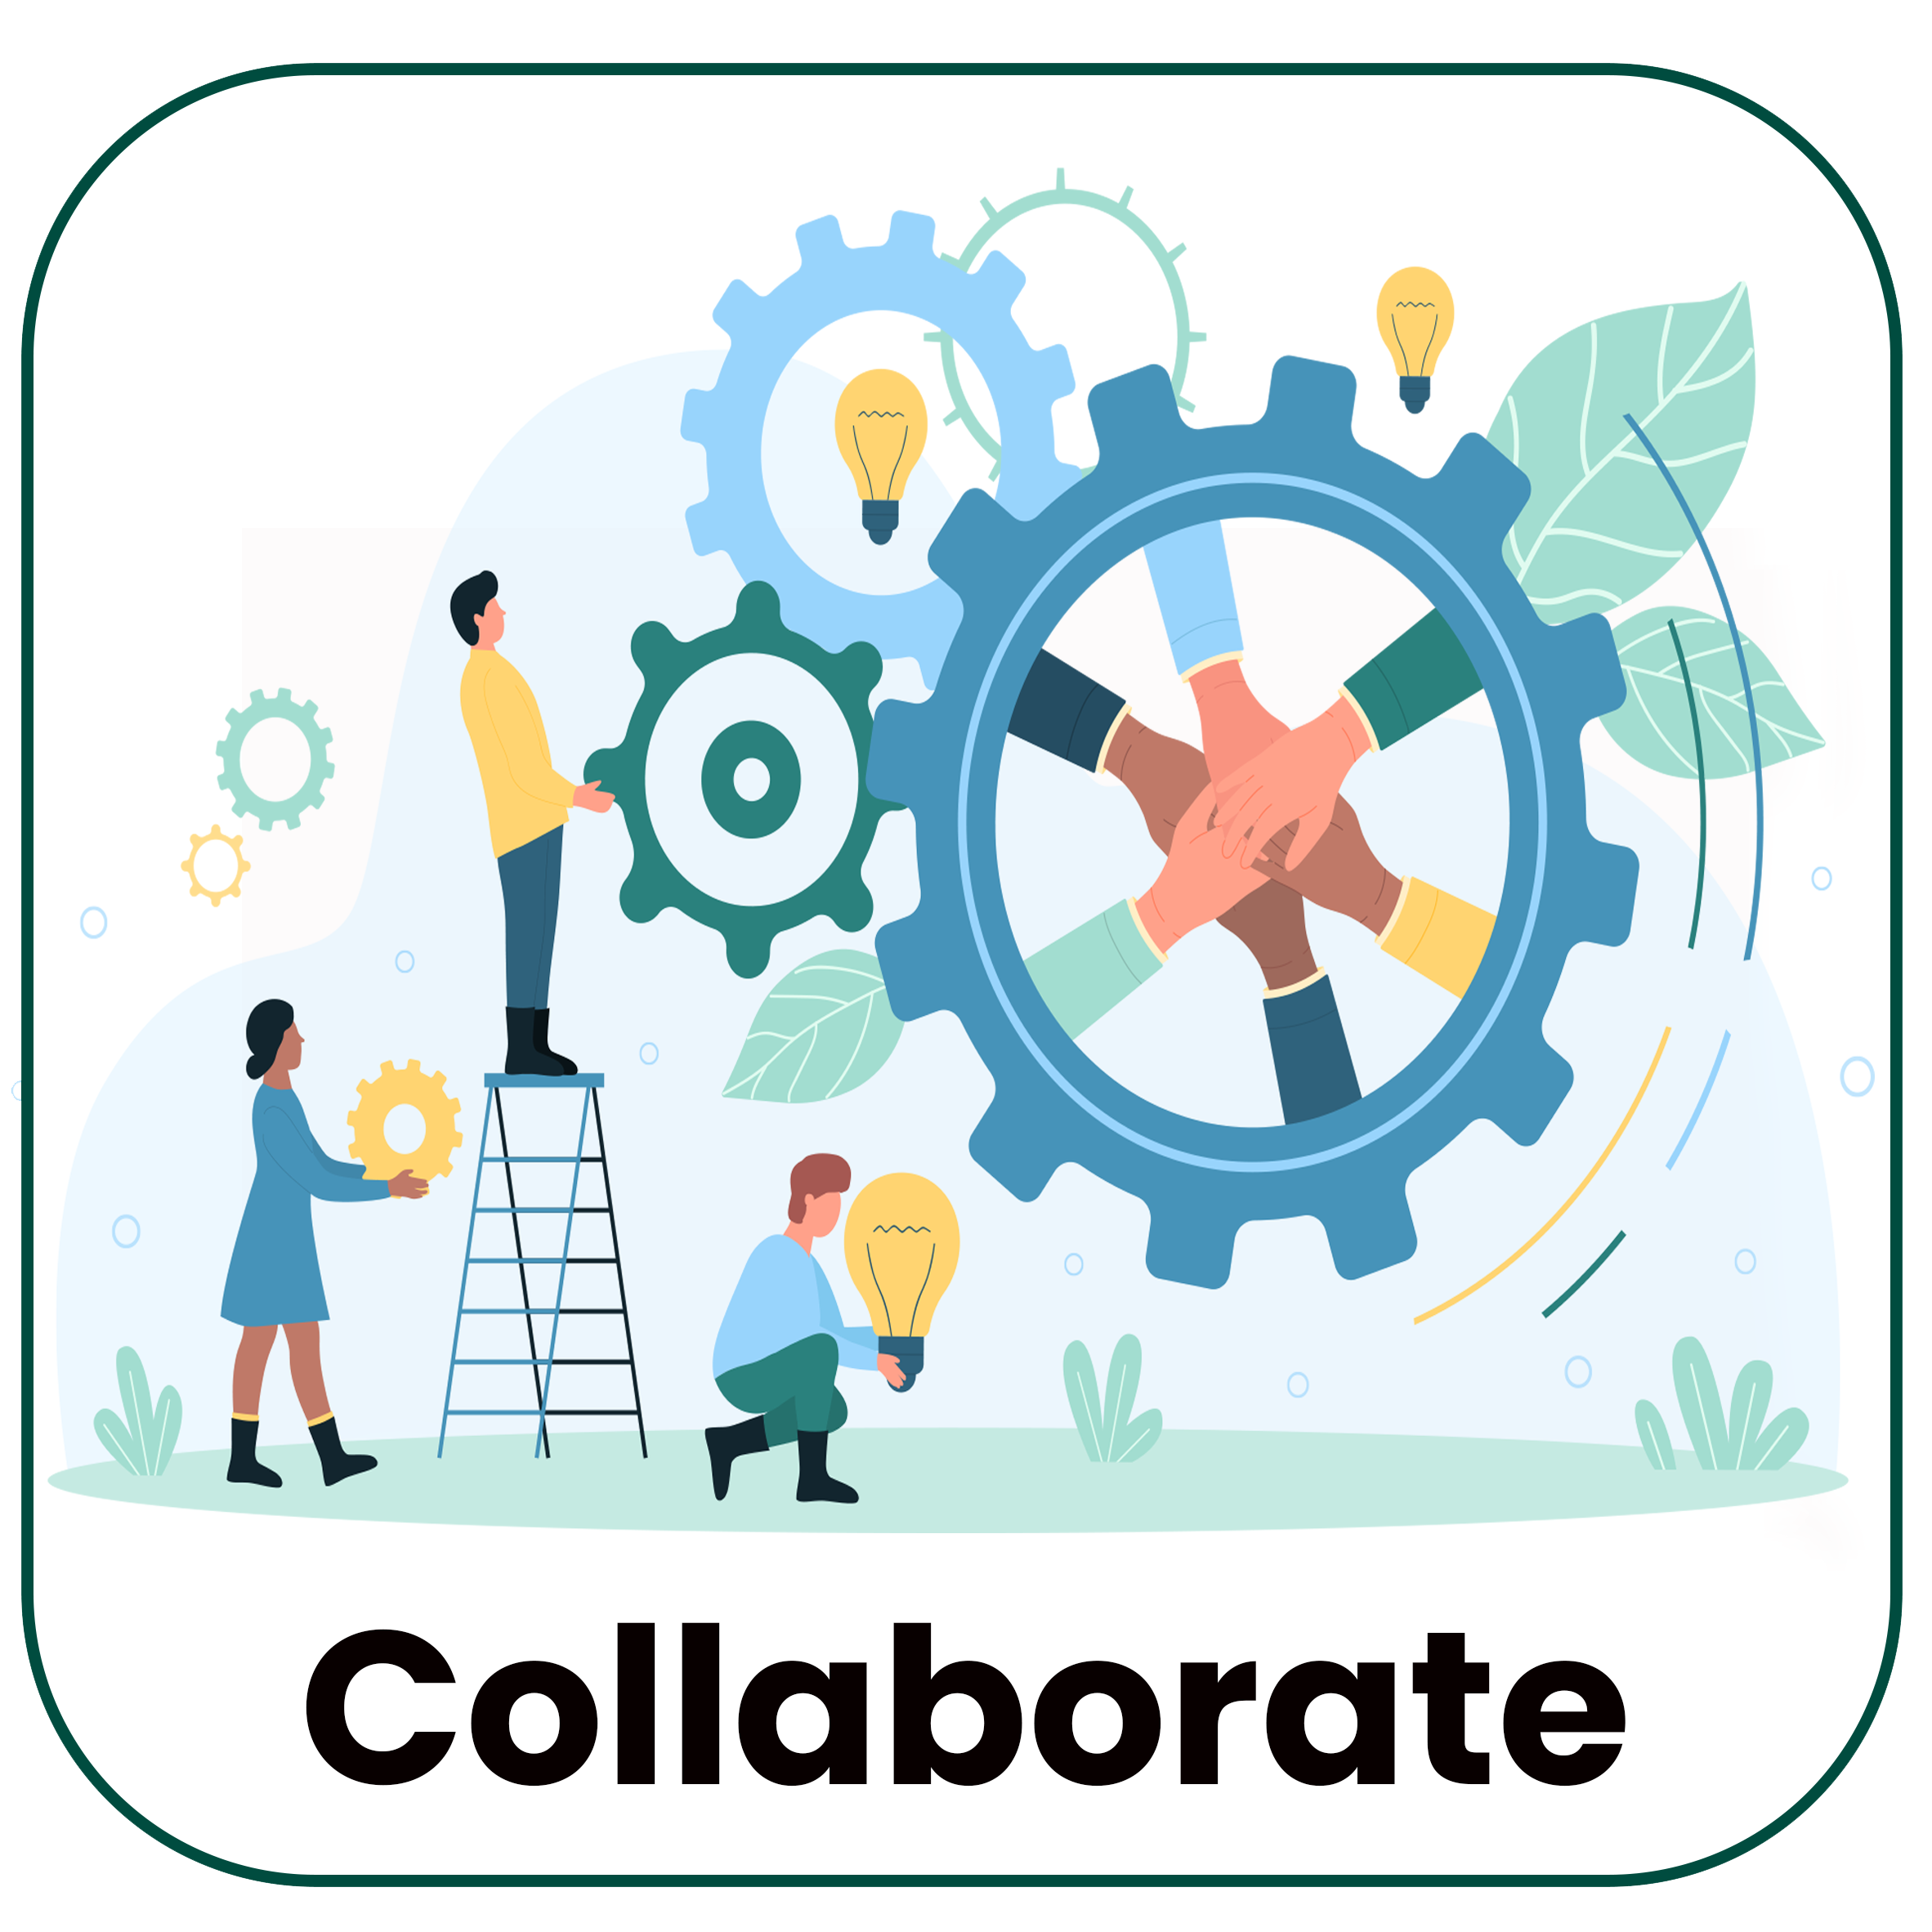 Collaborate illustration with link to teach page